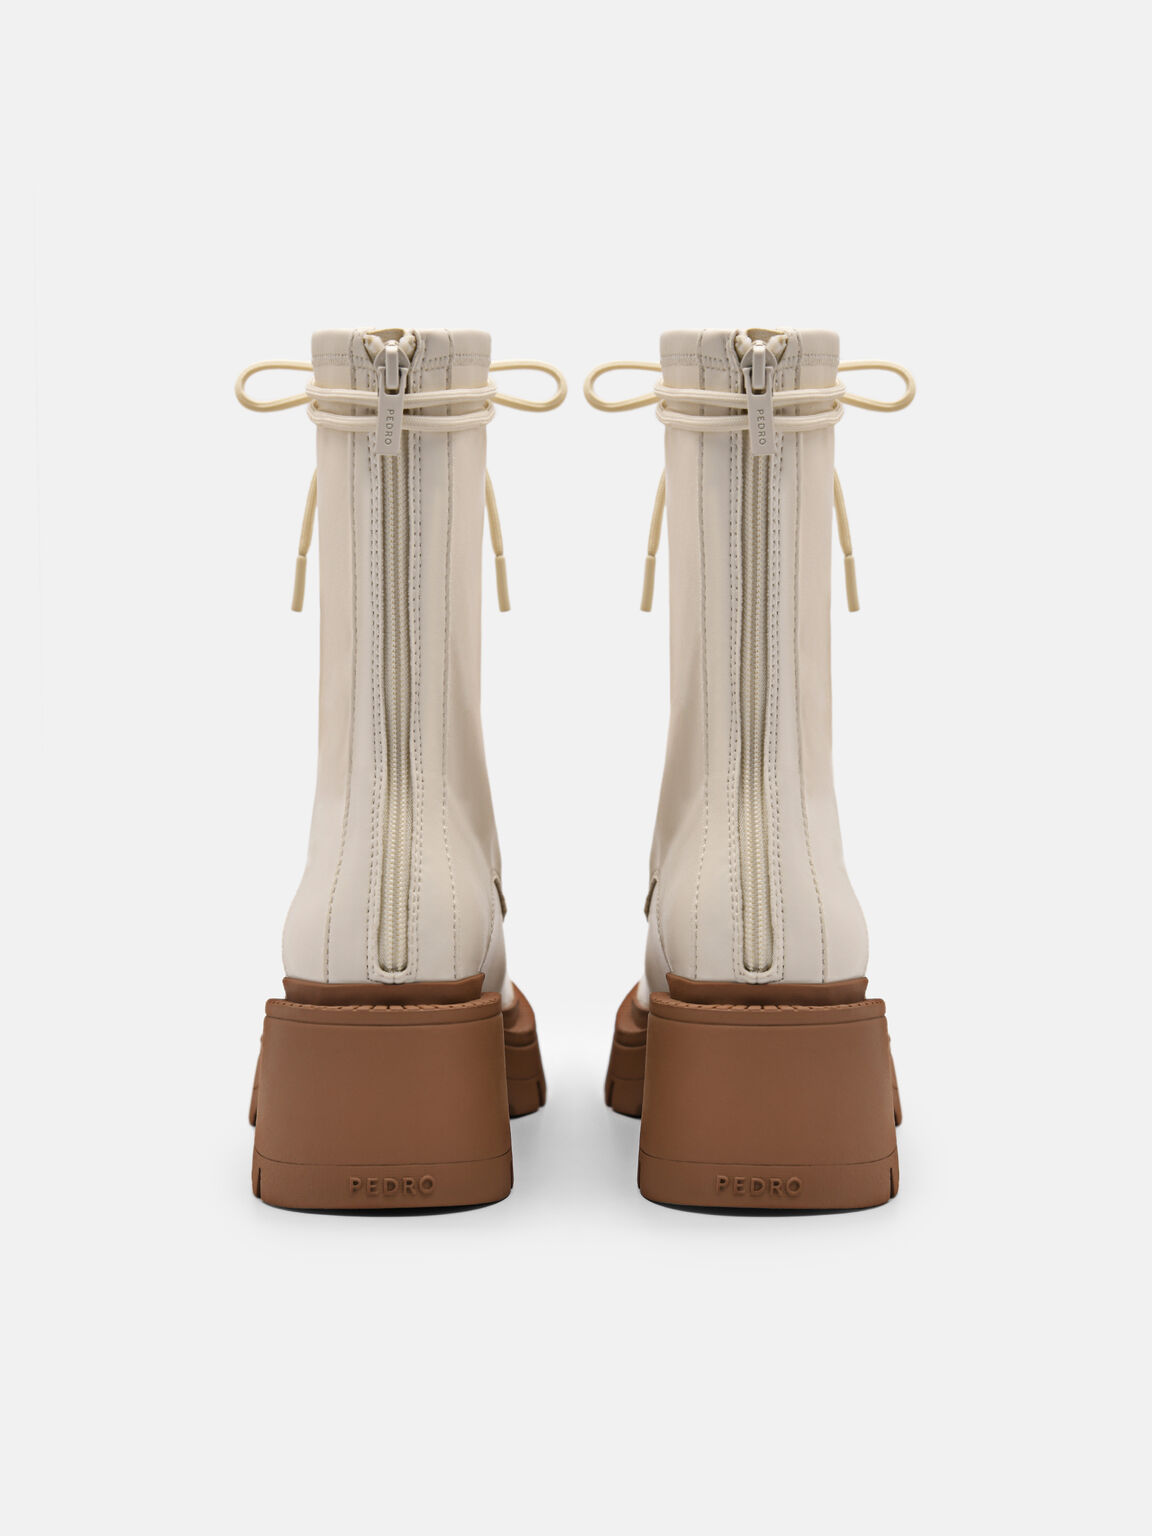 Poppy Ankle Boots, Beige